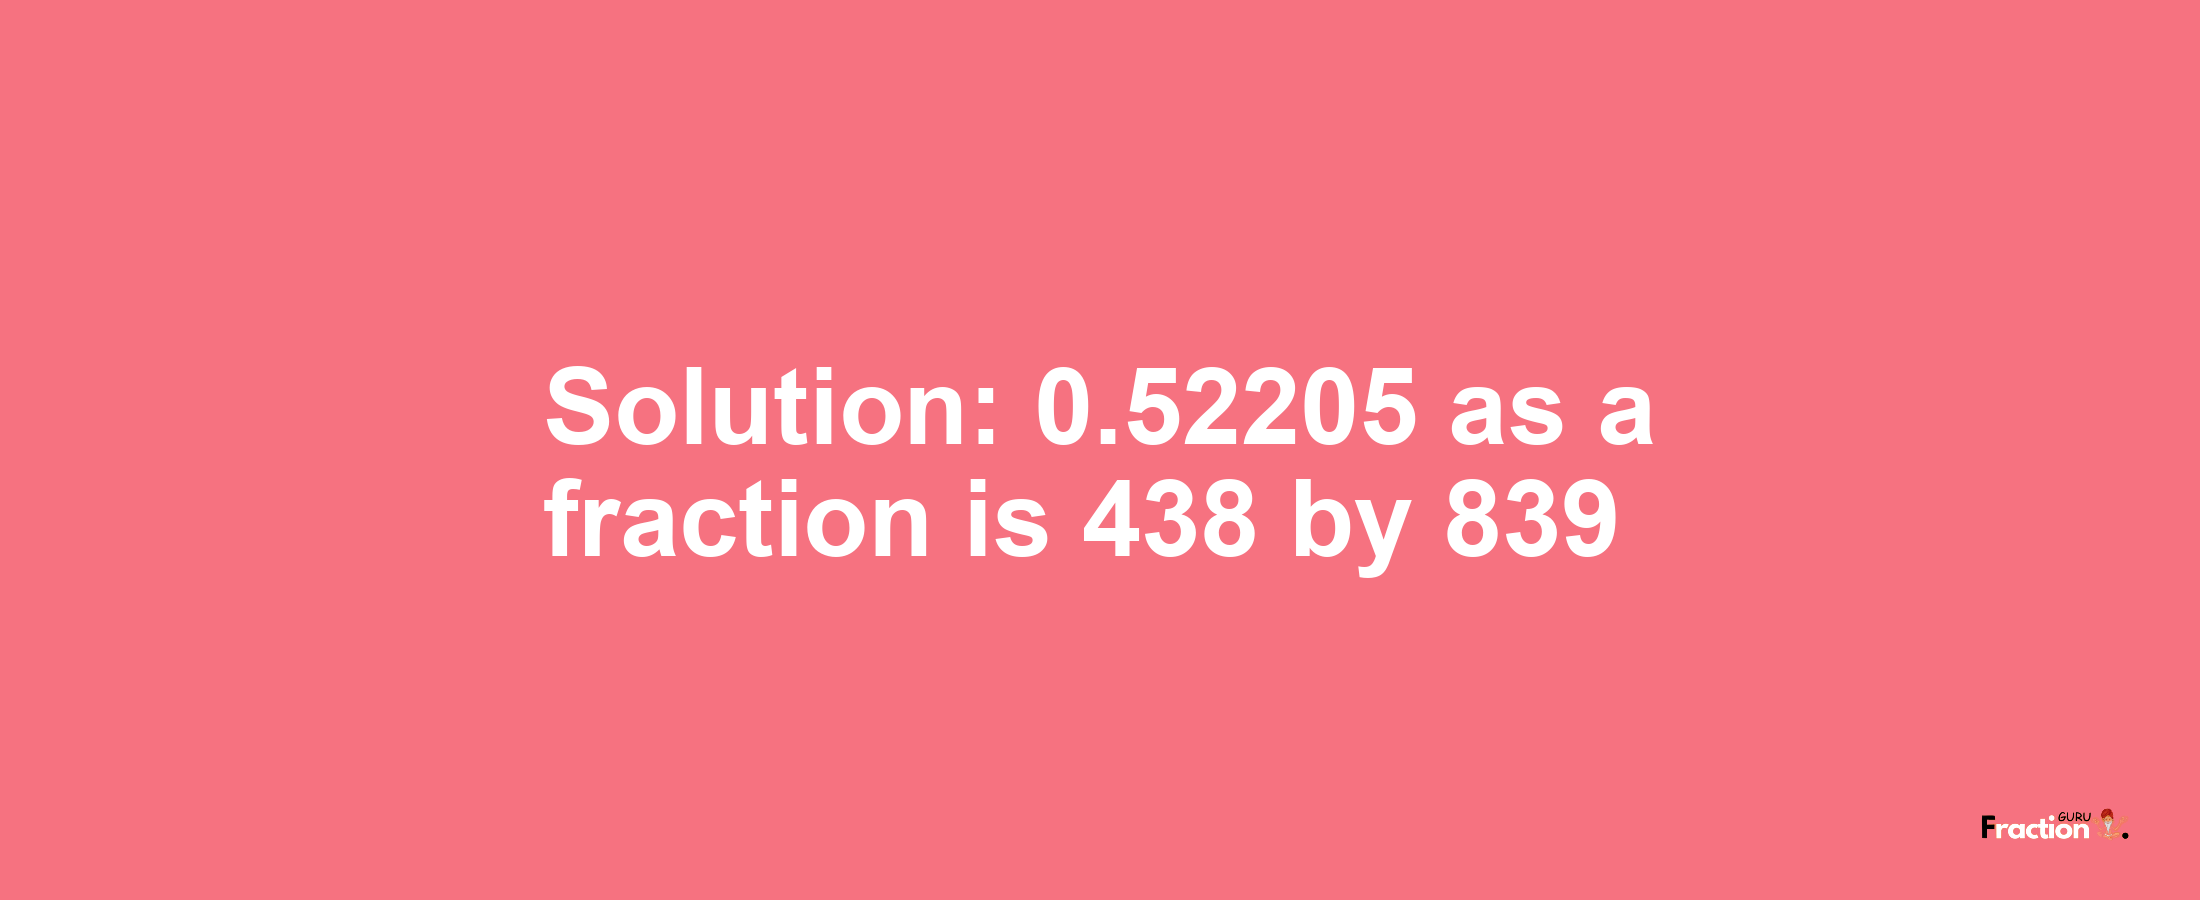 Solution:0.52205 as a fraction is 438/839